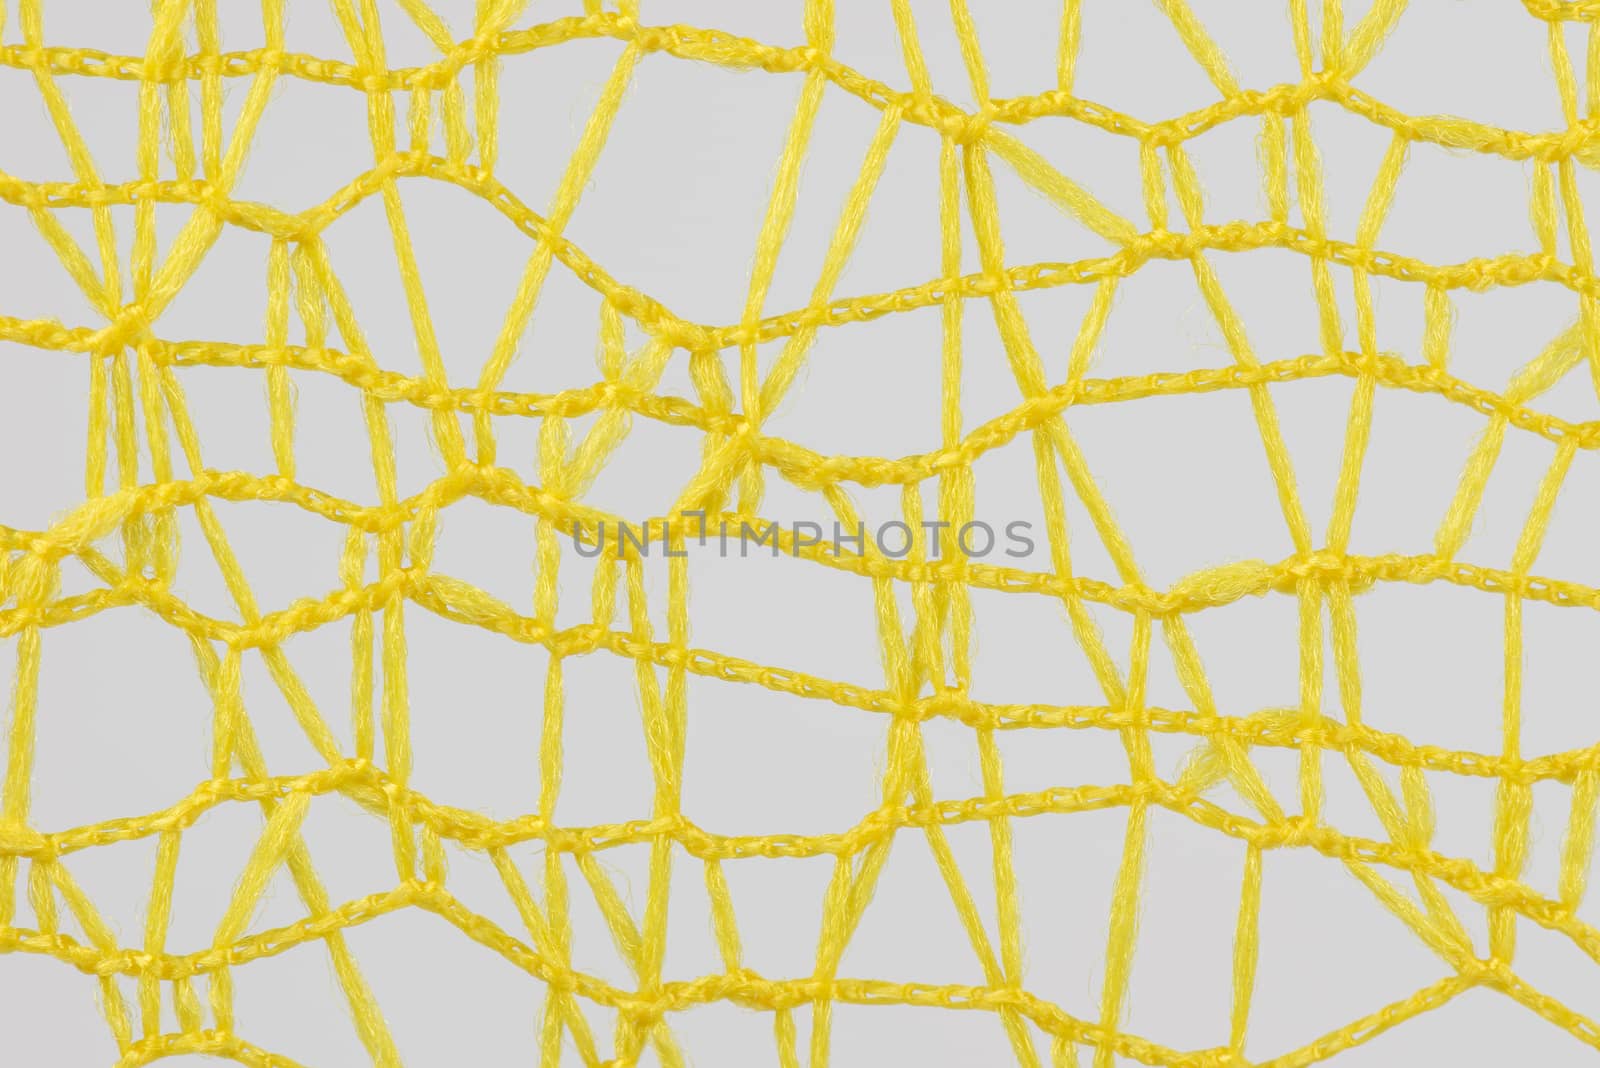 Tangled yellow wires as background 
 by Tofotografie